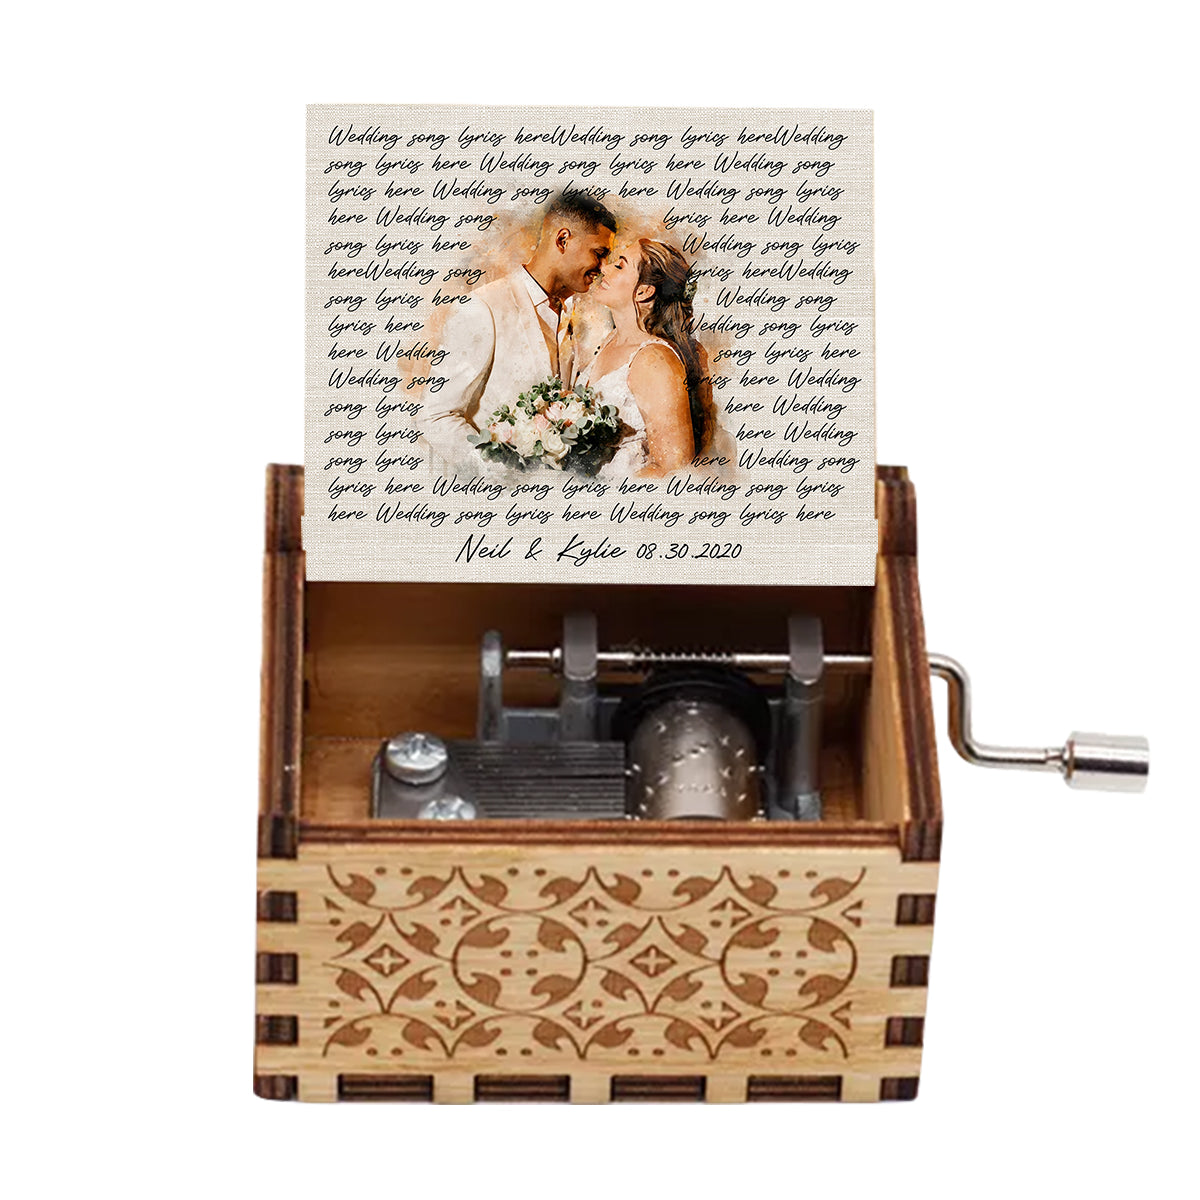 Wedding Song Lyrics With Personalized Watercolor Portrait - Personalized Husband And Wife Hand Crank Music Box